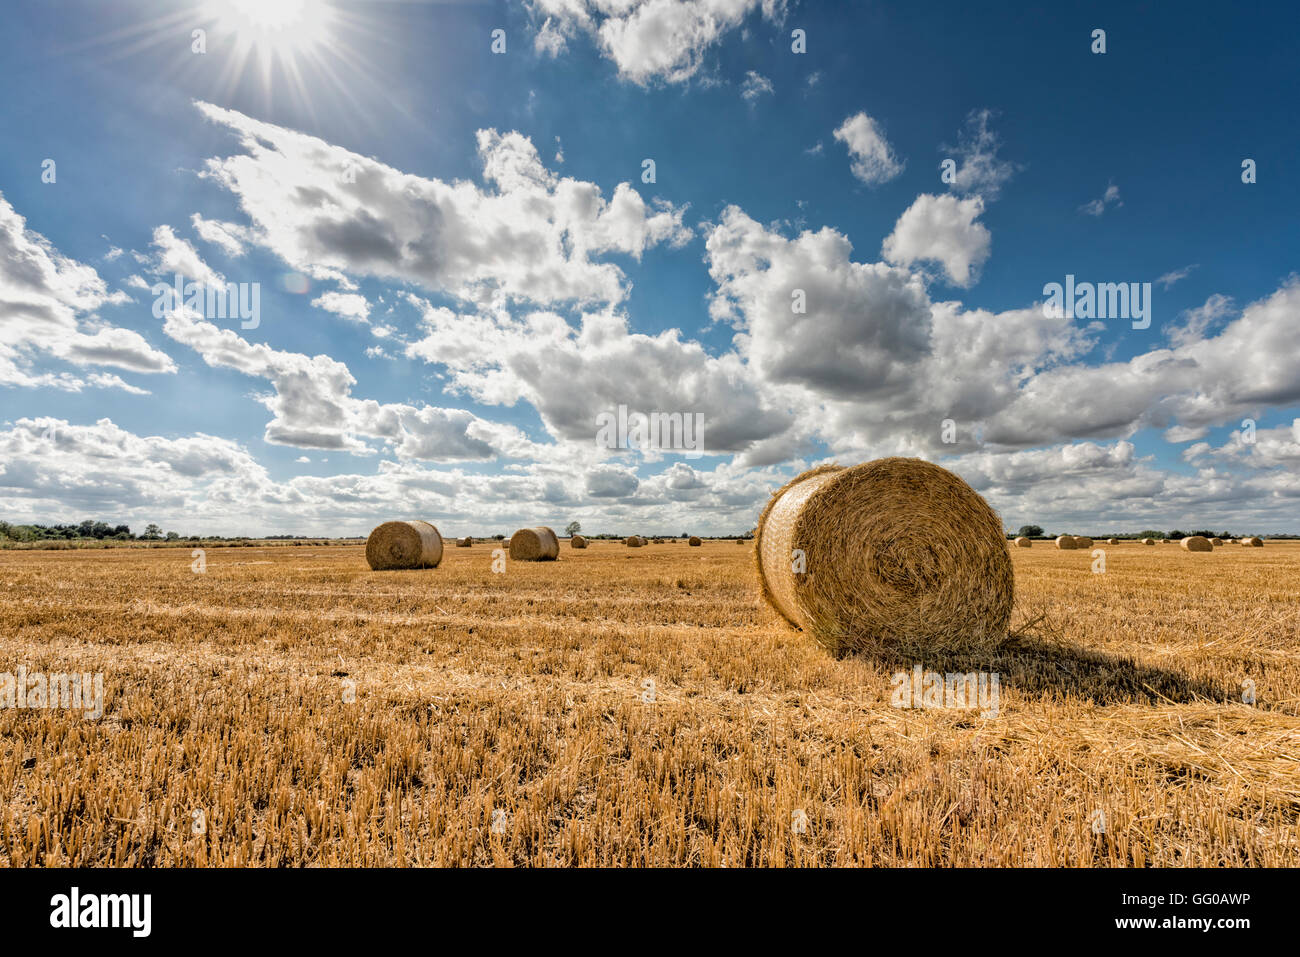 Willingham, Cambridgeshire UK. 3rd August 2016. Clouds scud across the big fen skies over freshly baled straw in the flat landscape. There was a brisk wind in warm sunshine this afternoon. The weather is forecast to continue with a mix of sun and clouds. Credit Julian Eales/Alamy Live News Stock Photo